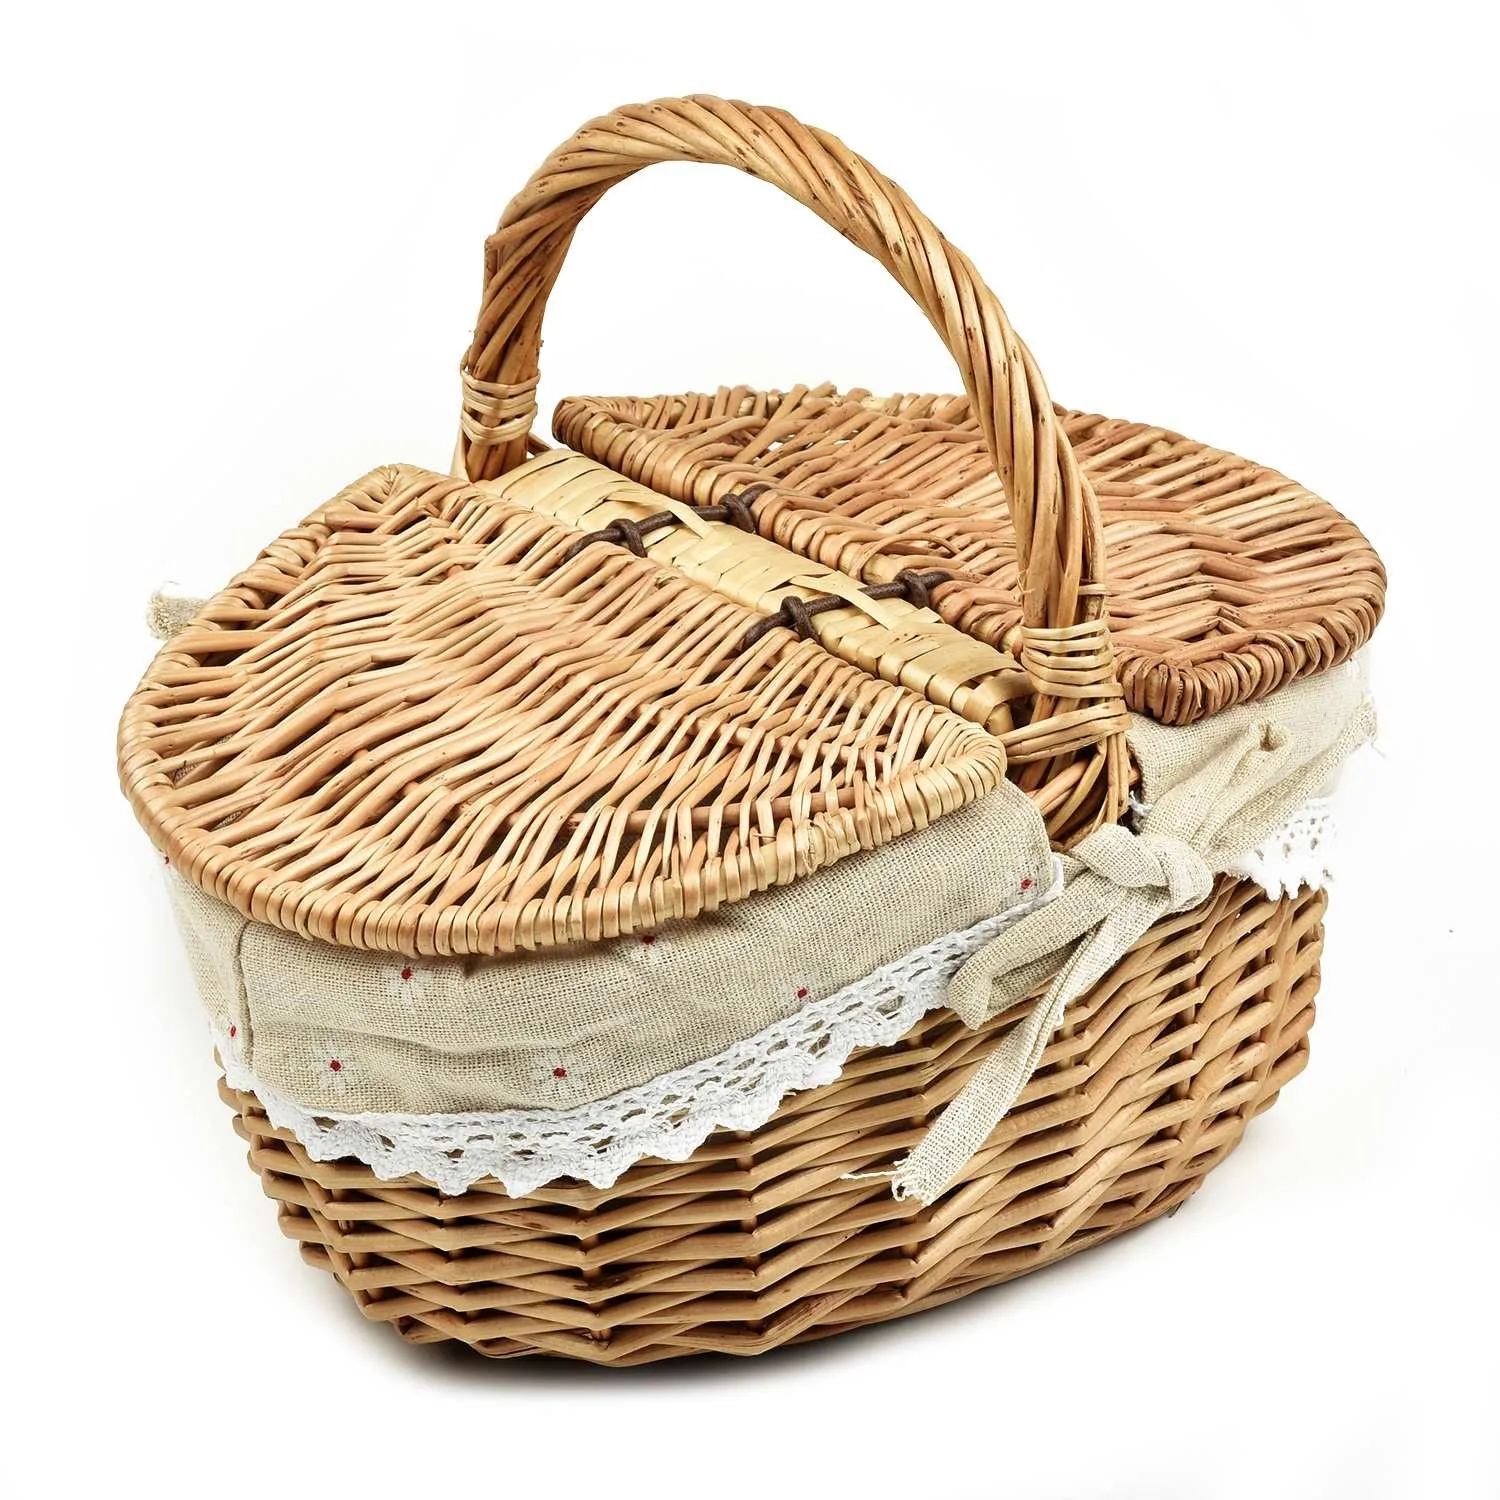 

Wicker Picnic Basket 35*25*17cm Multifunctional Picnic Basket Removable Cotton Lining For Picnic Hiking Camping Family Gathering